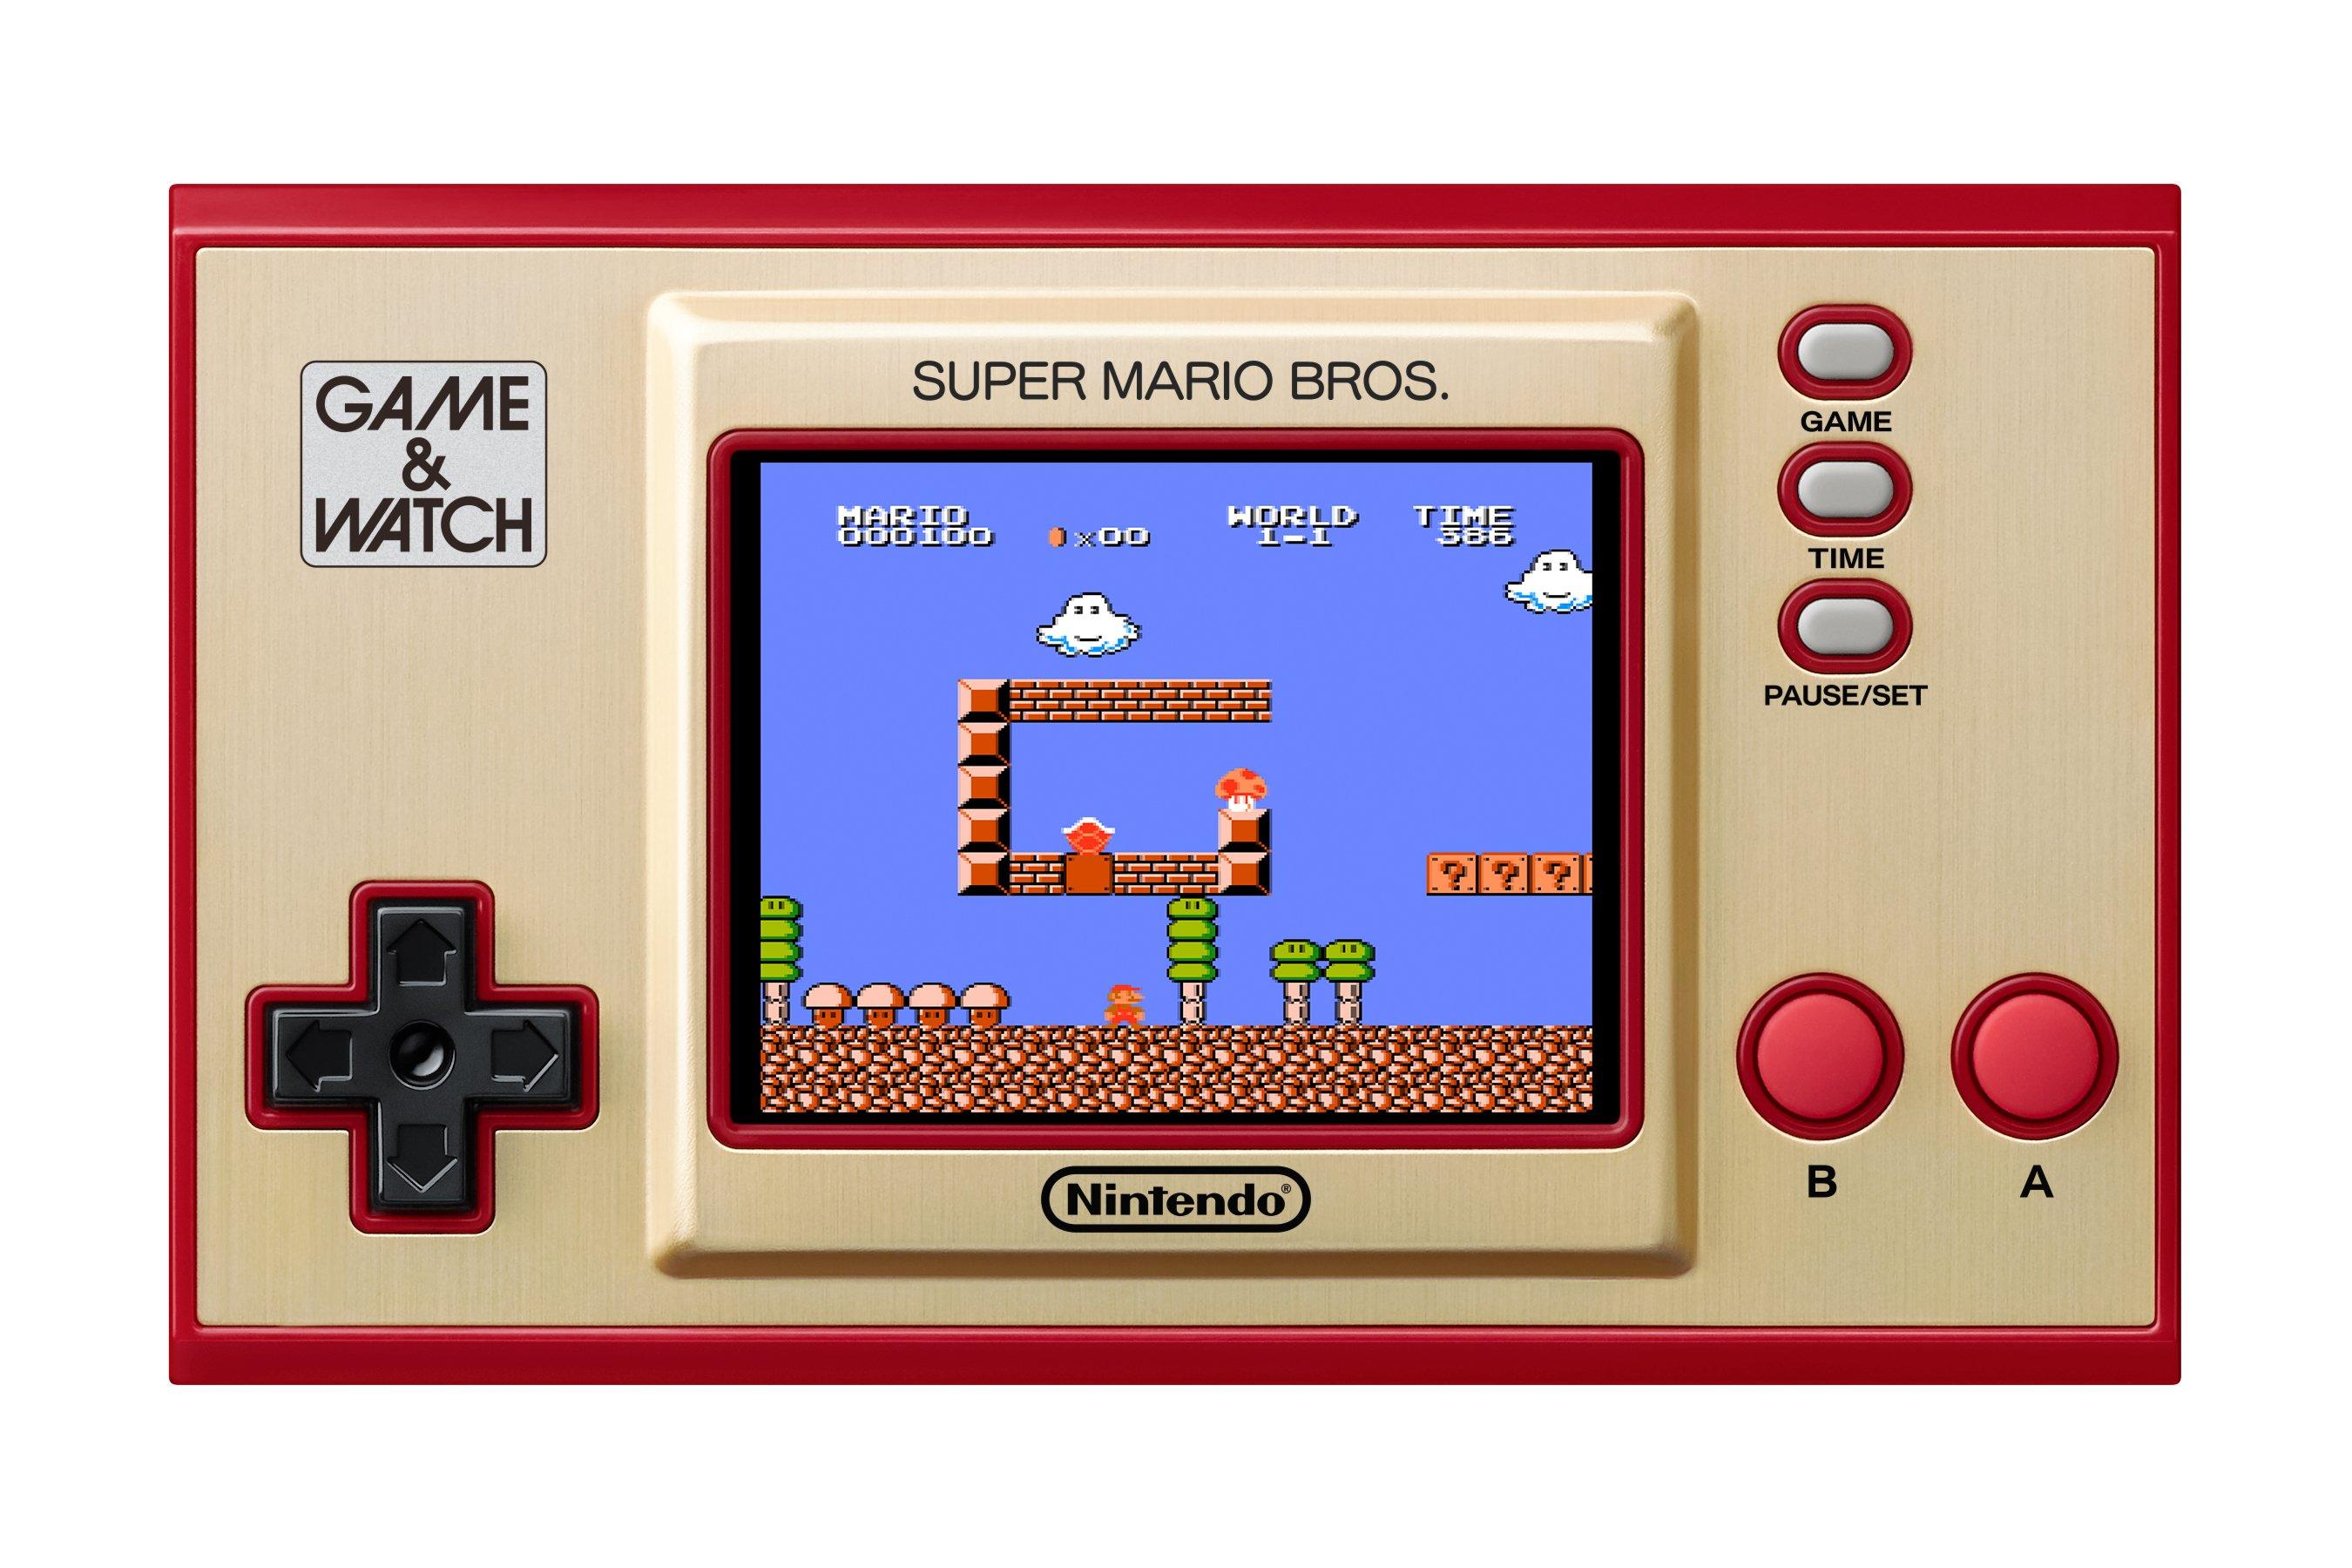 Game and Watch: Super Mario Bros.